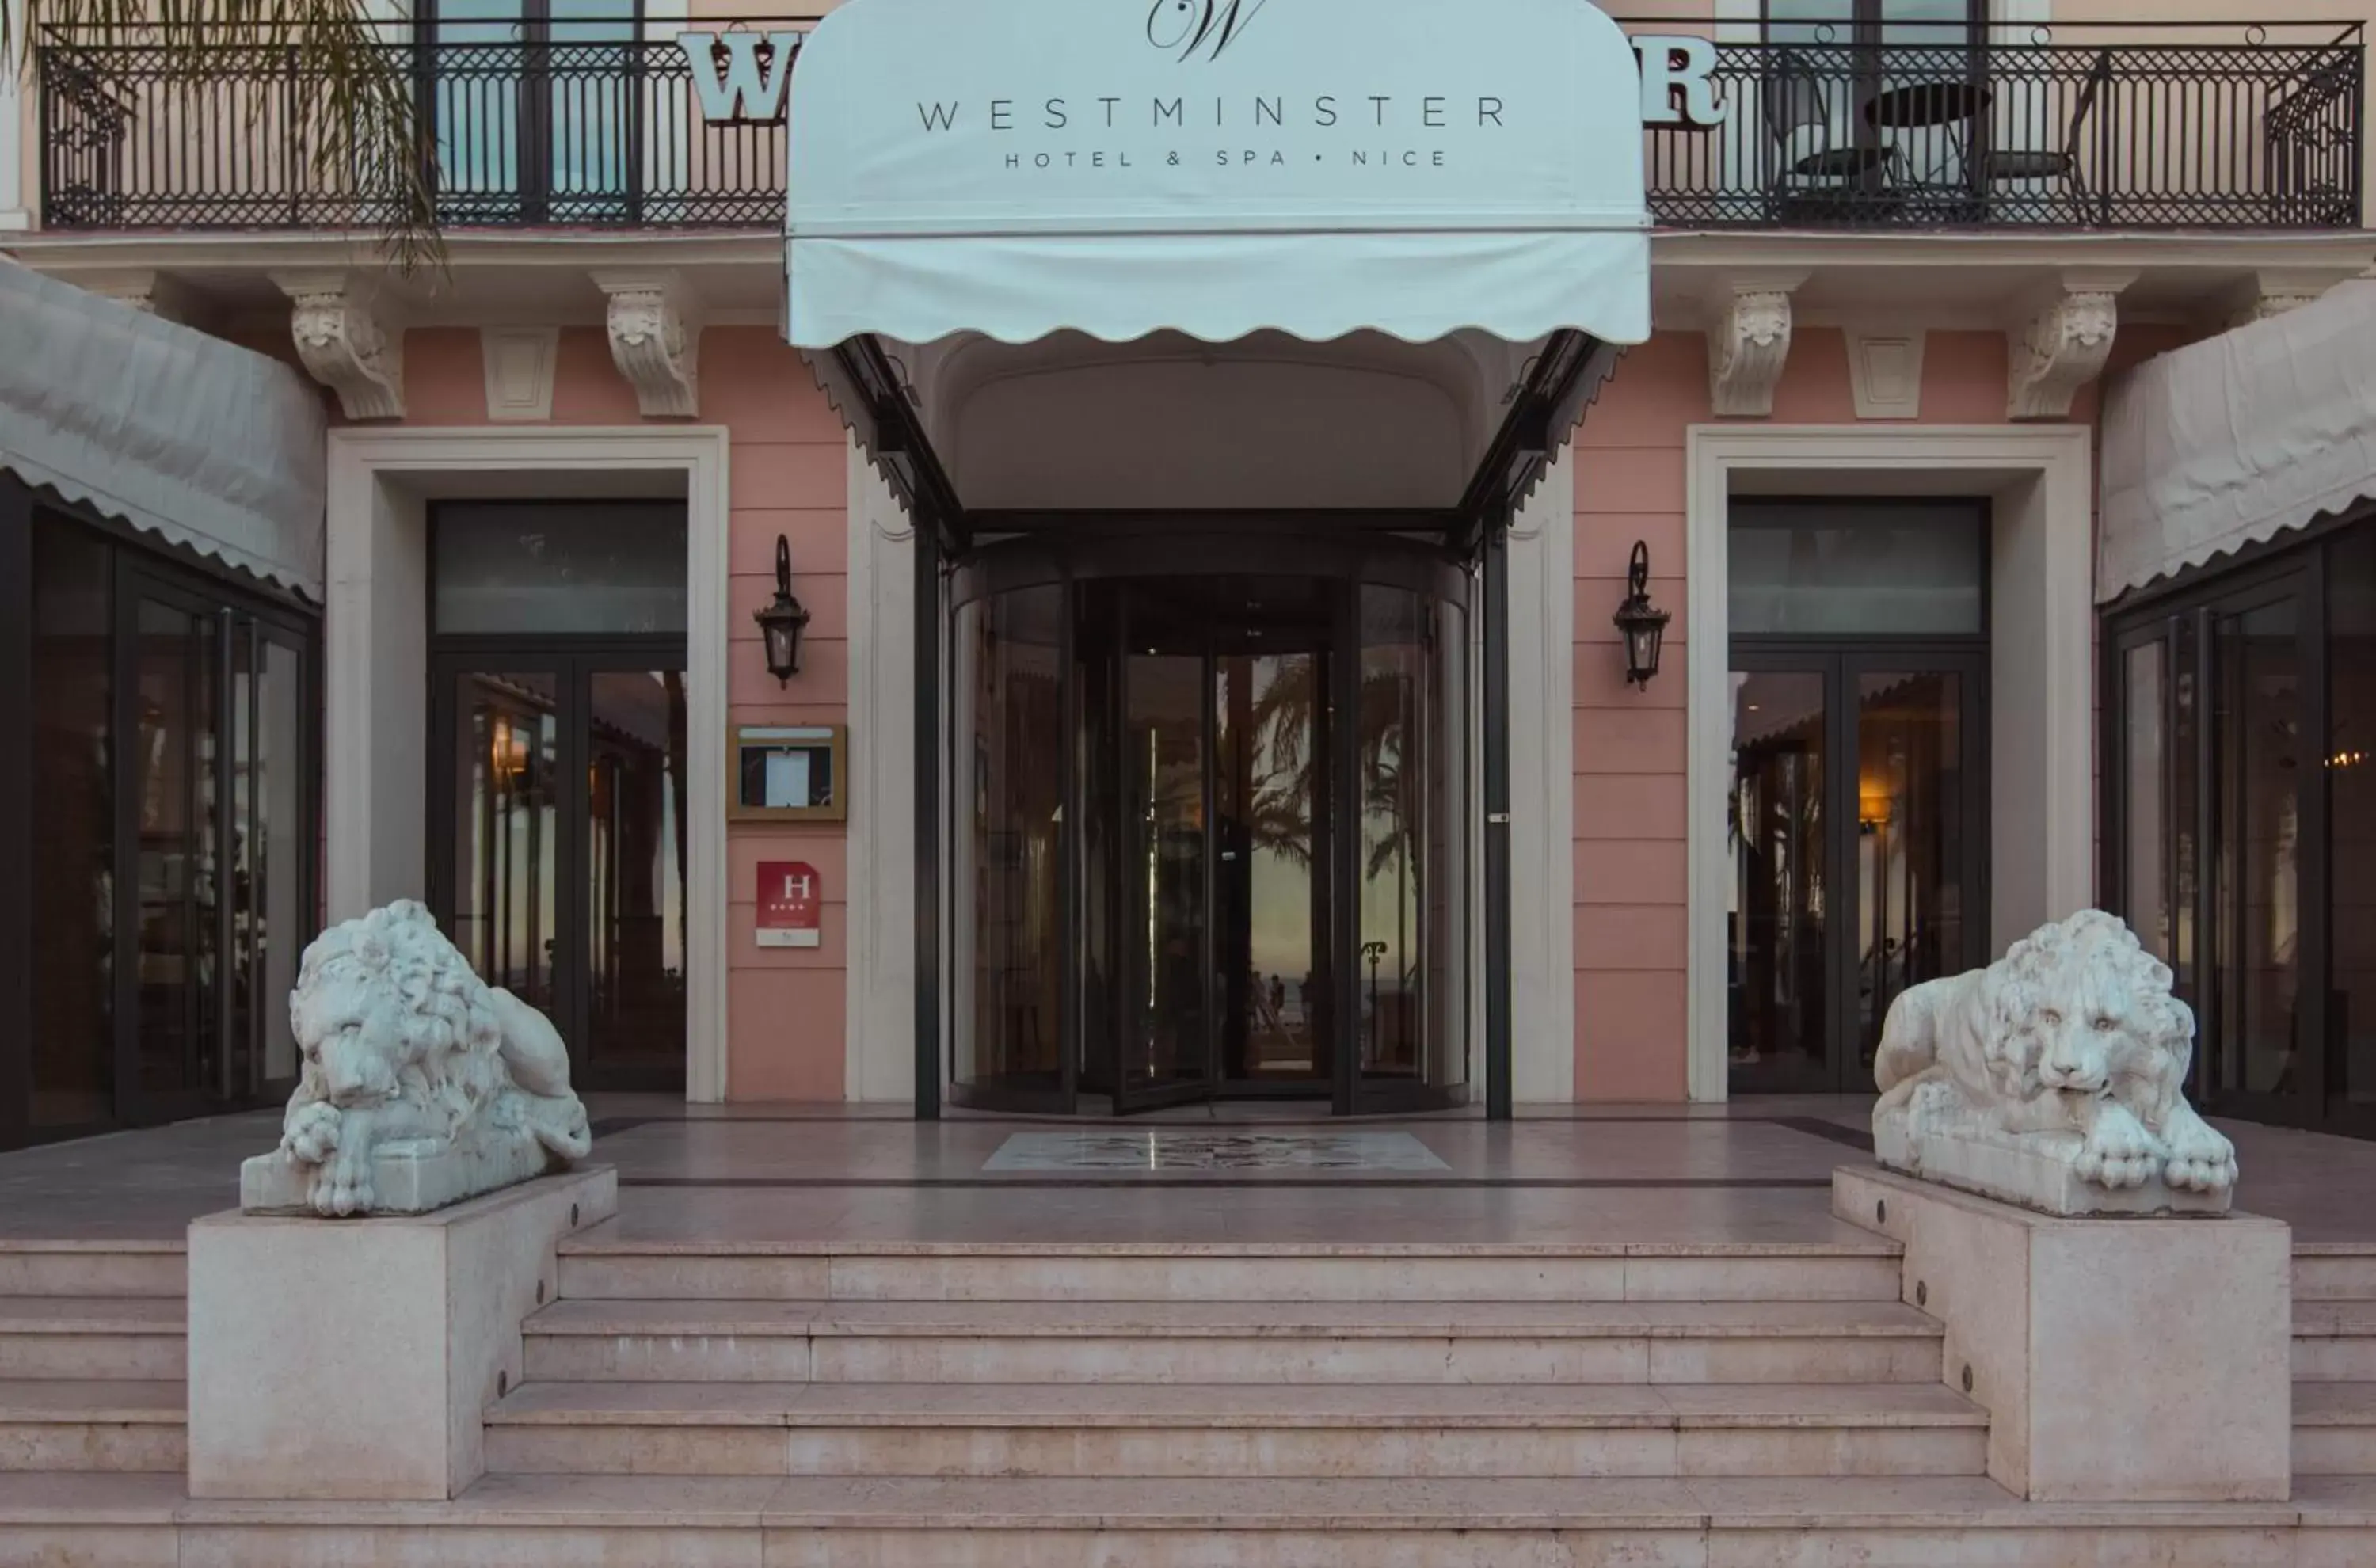 Facade/entrance in Westminster Hotel & Spa Nice